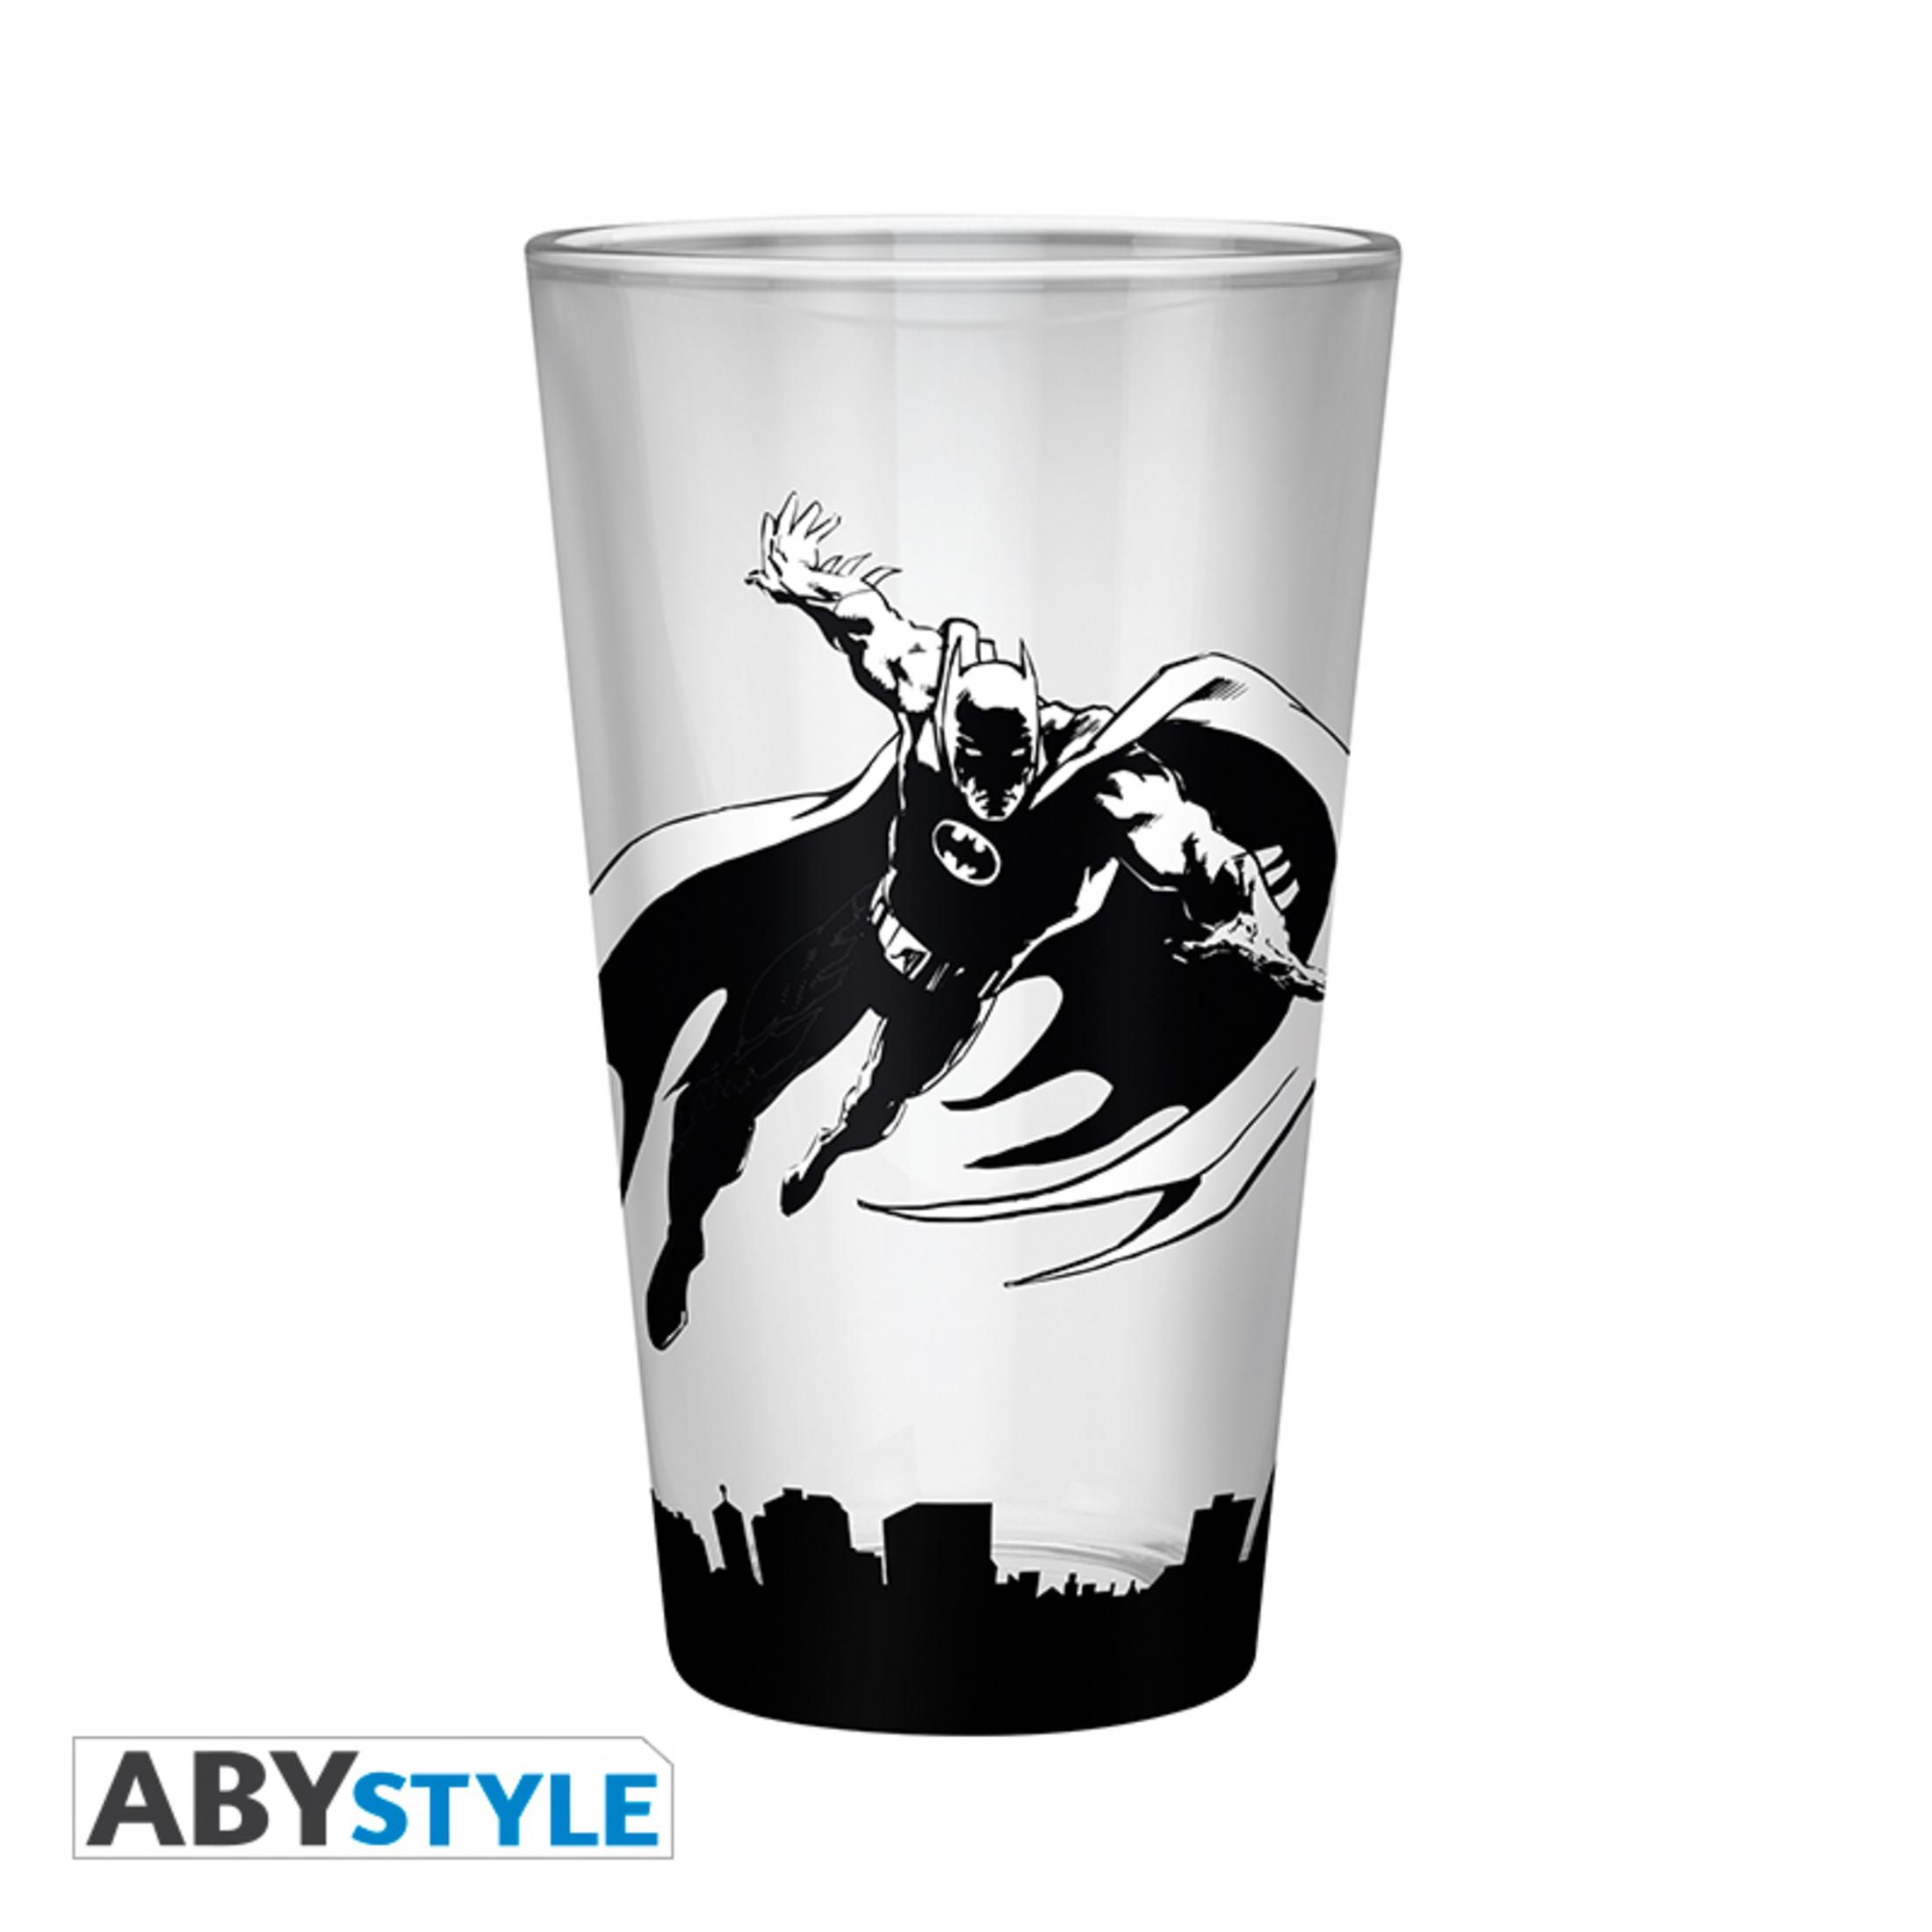 ABYVER126 DC BATMAN DRK GLAS 500ML NGHT